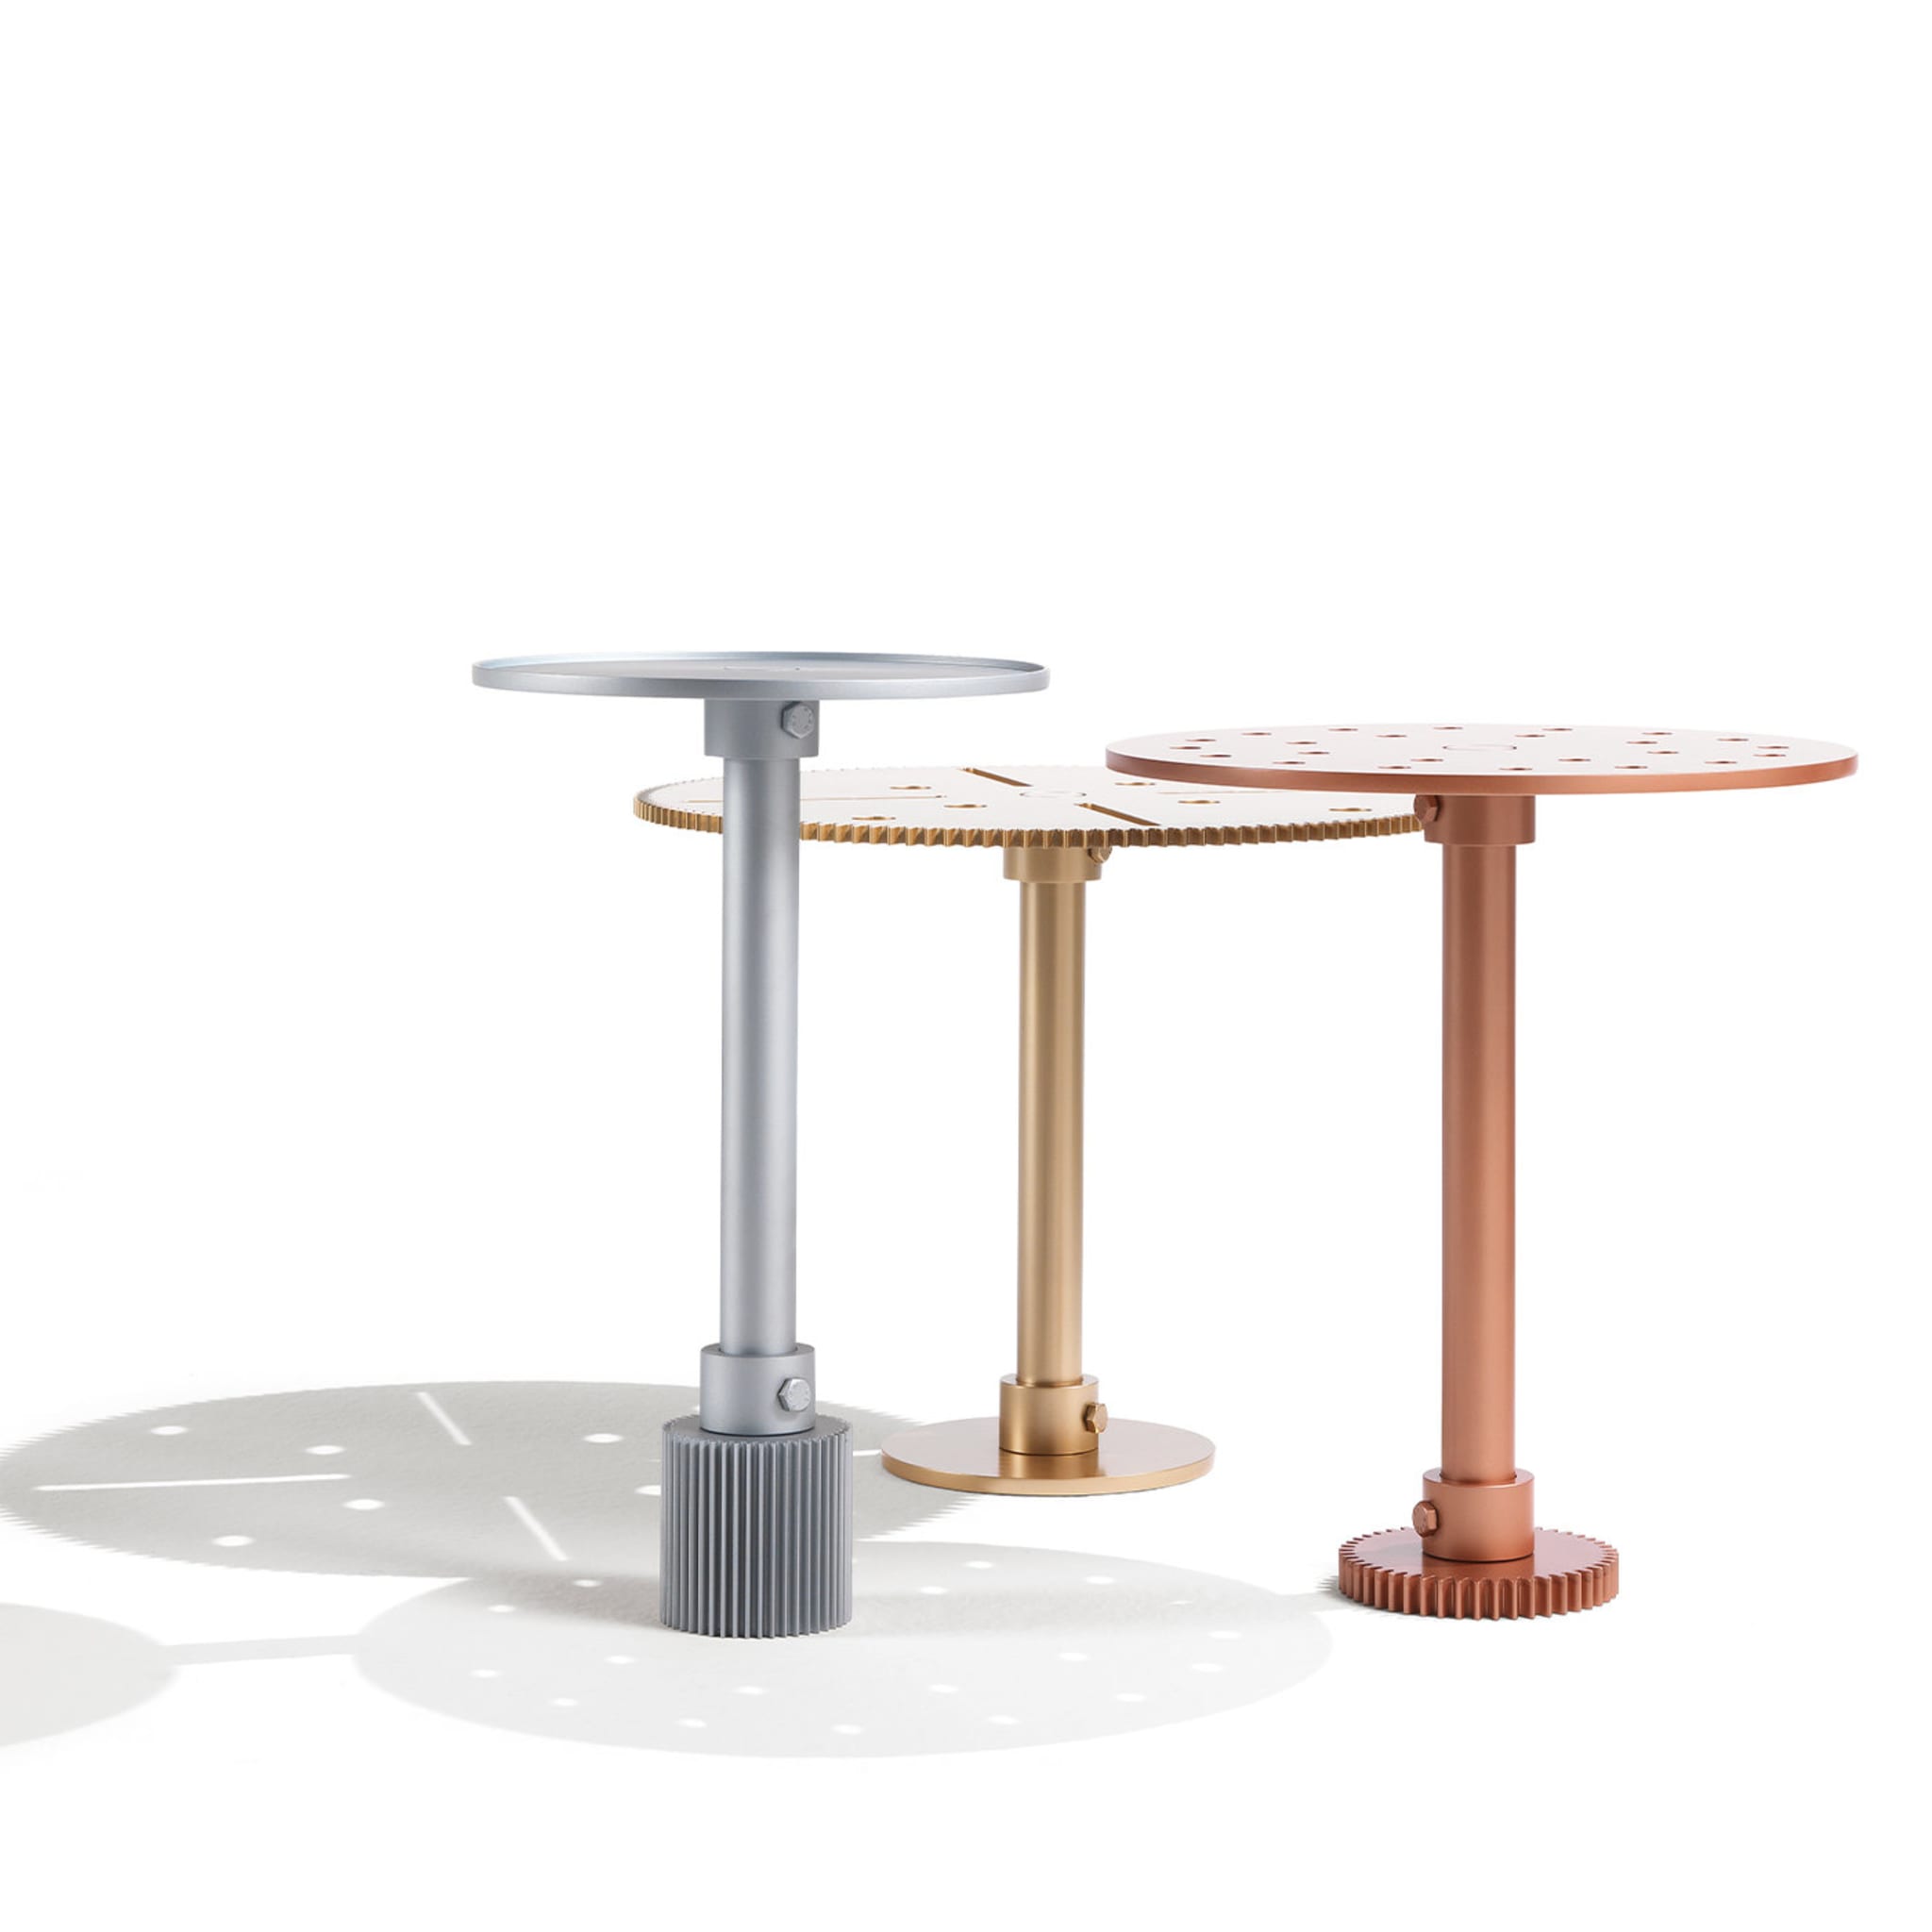 Maseen E Side Table by Samer Alameen - Alternative view 2